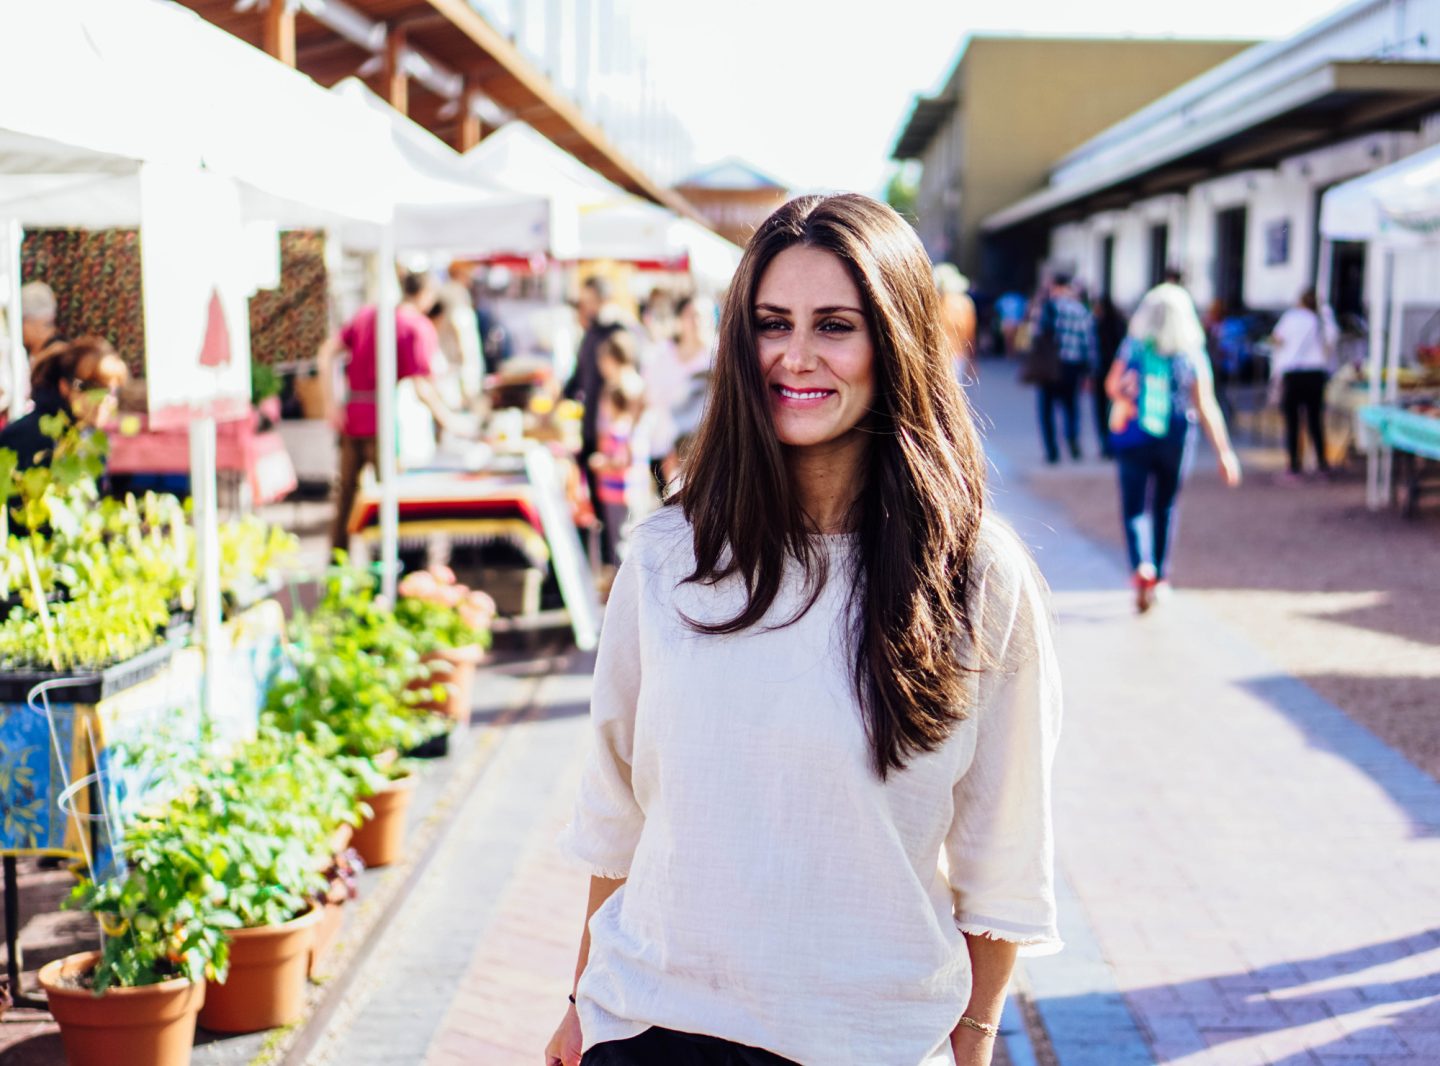 I'm exploring the Santa Fe Farmer's Market and the famous Cathedral Basilica of St. Francis of Assisi in some of my favorite maternity pieces from hatch collection over on The Dandy Liar, including this comfortable black jumper, and these extra forgiving paperbag waist pants and linen top.